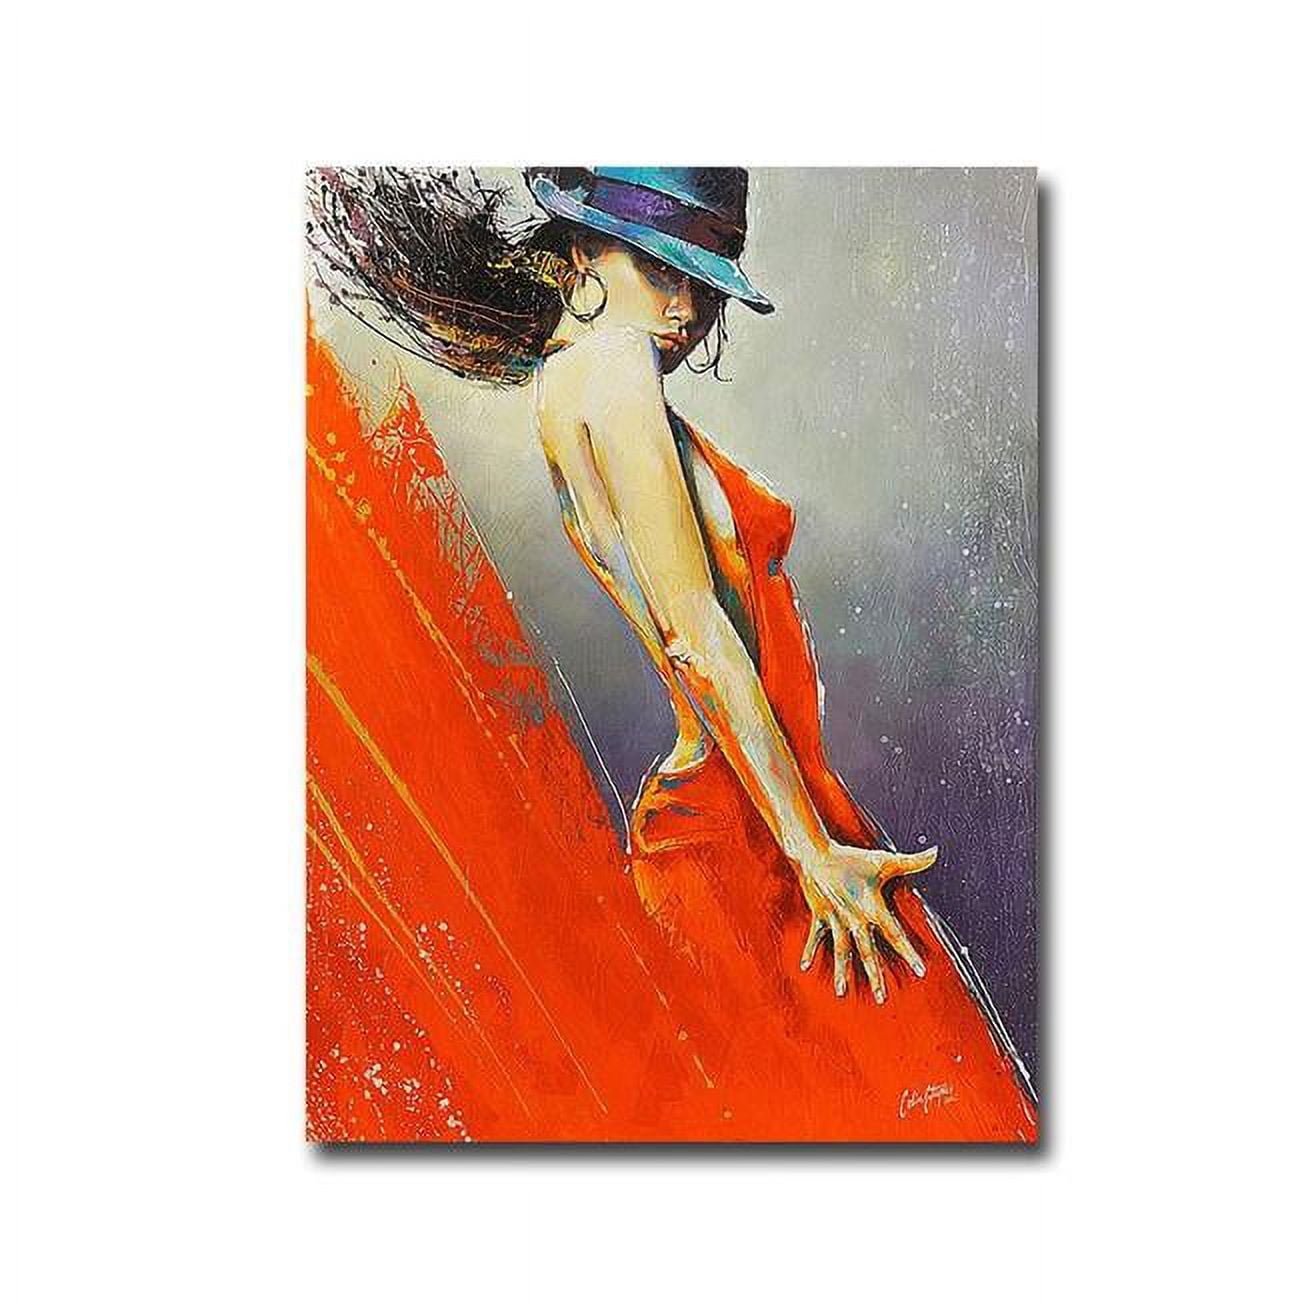 Artistic Home Gallery 1216G789IG Rubi by Colin John Staples Premium Gallery-Wrapped Canvas Giclee Art - 12 x 16 x 1.5 in.